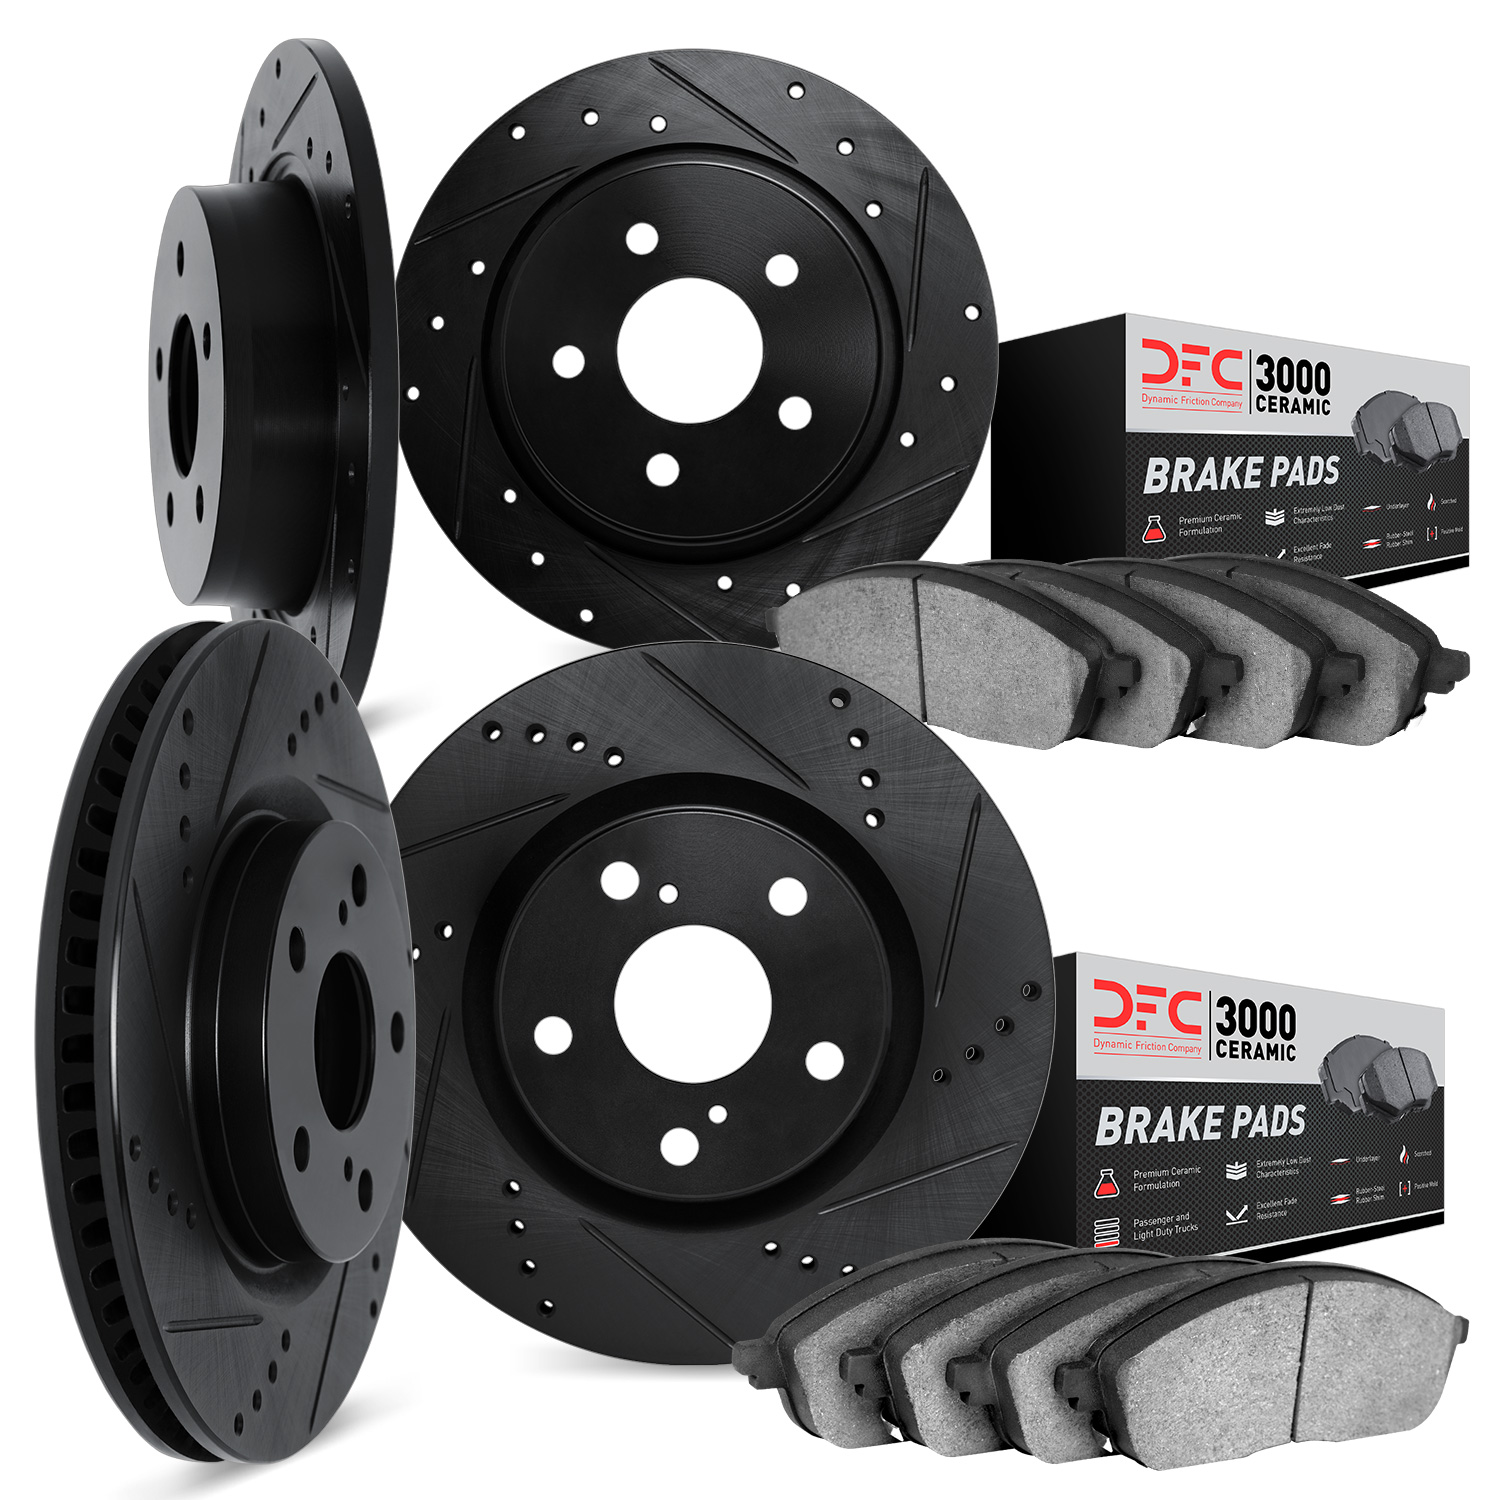 8304-59084 Drilled/Slotted Brake Rotors with 3000-Series Ceramic Brake Pads Kit [Black], Fits Select Acura/Honda, Position: Fron